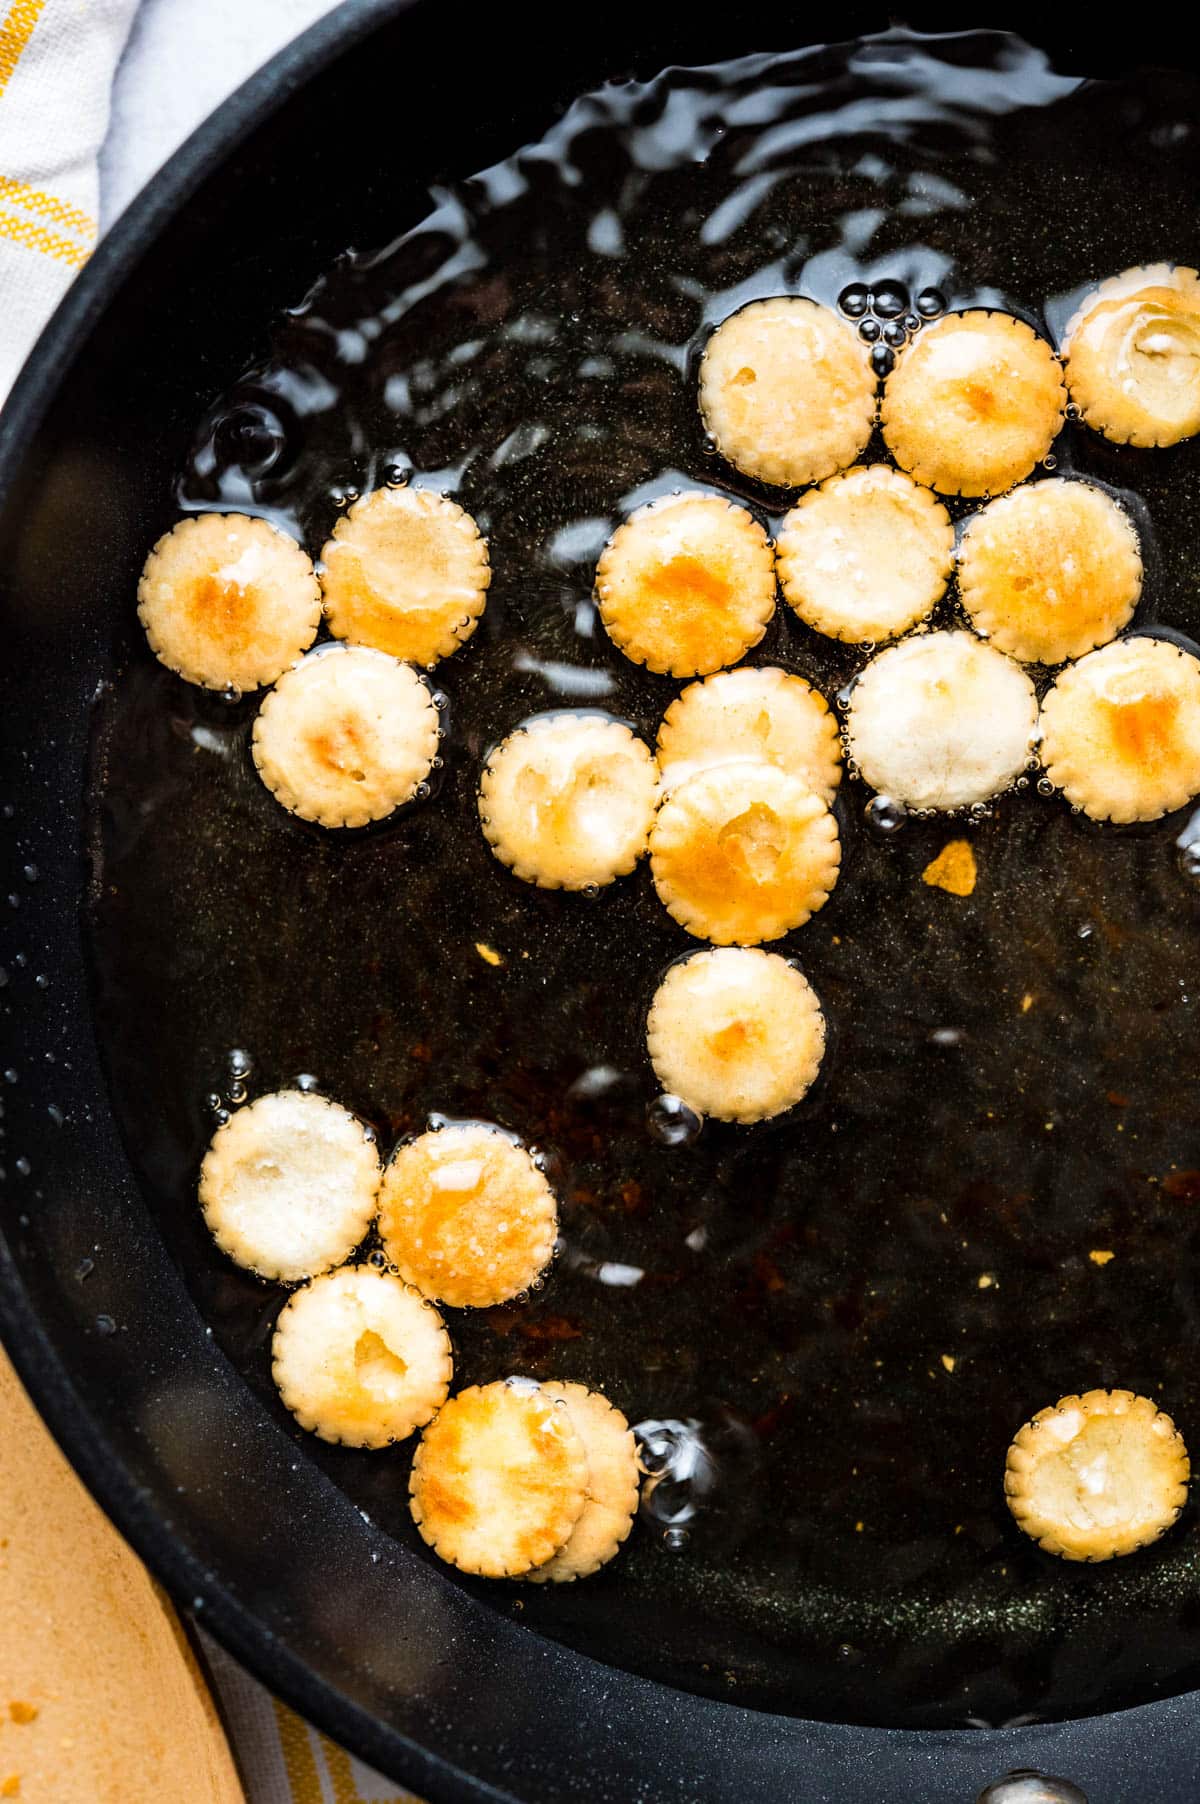 Frying the crackers in oil.